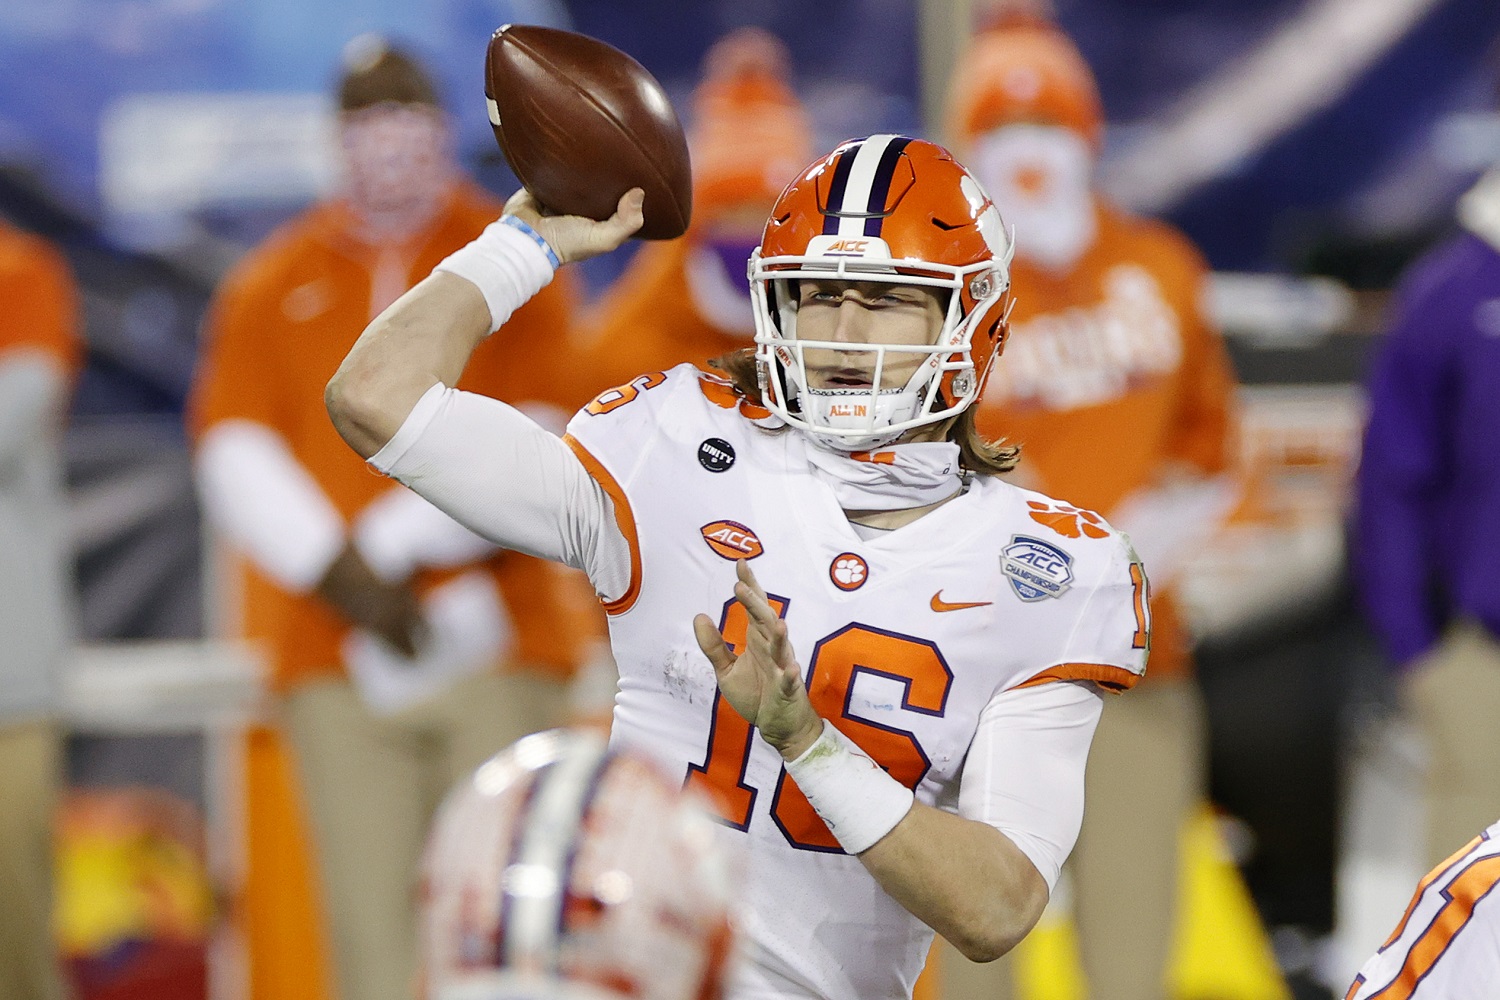 Trevor Lawrence of Clemson is expected to go to the Jacksonville Jaguars as the first pick in the NFL draft April 29.